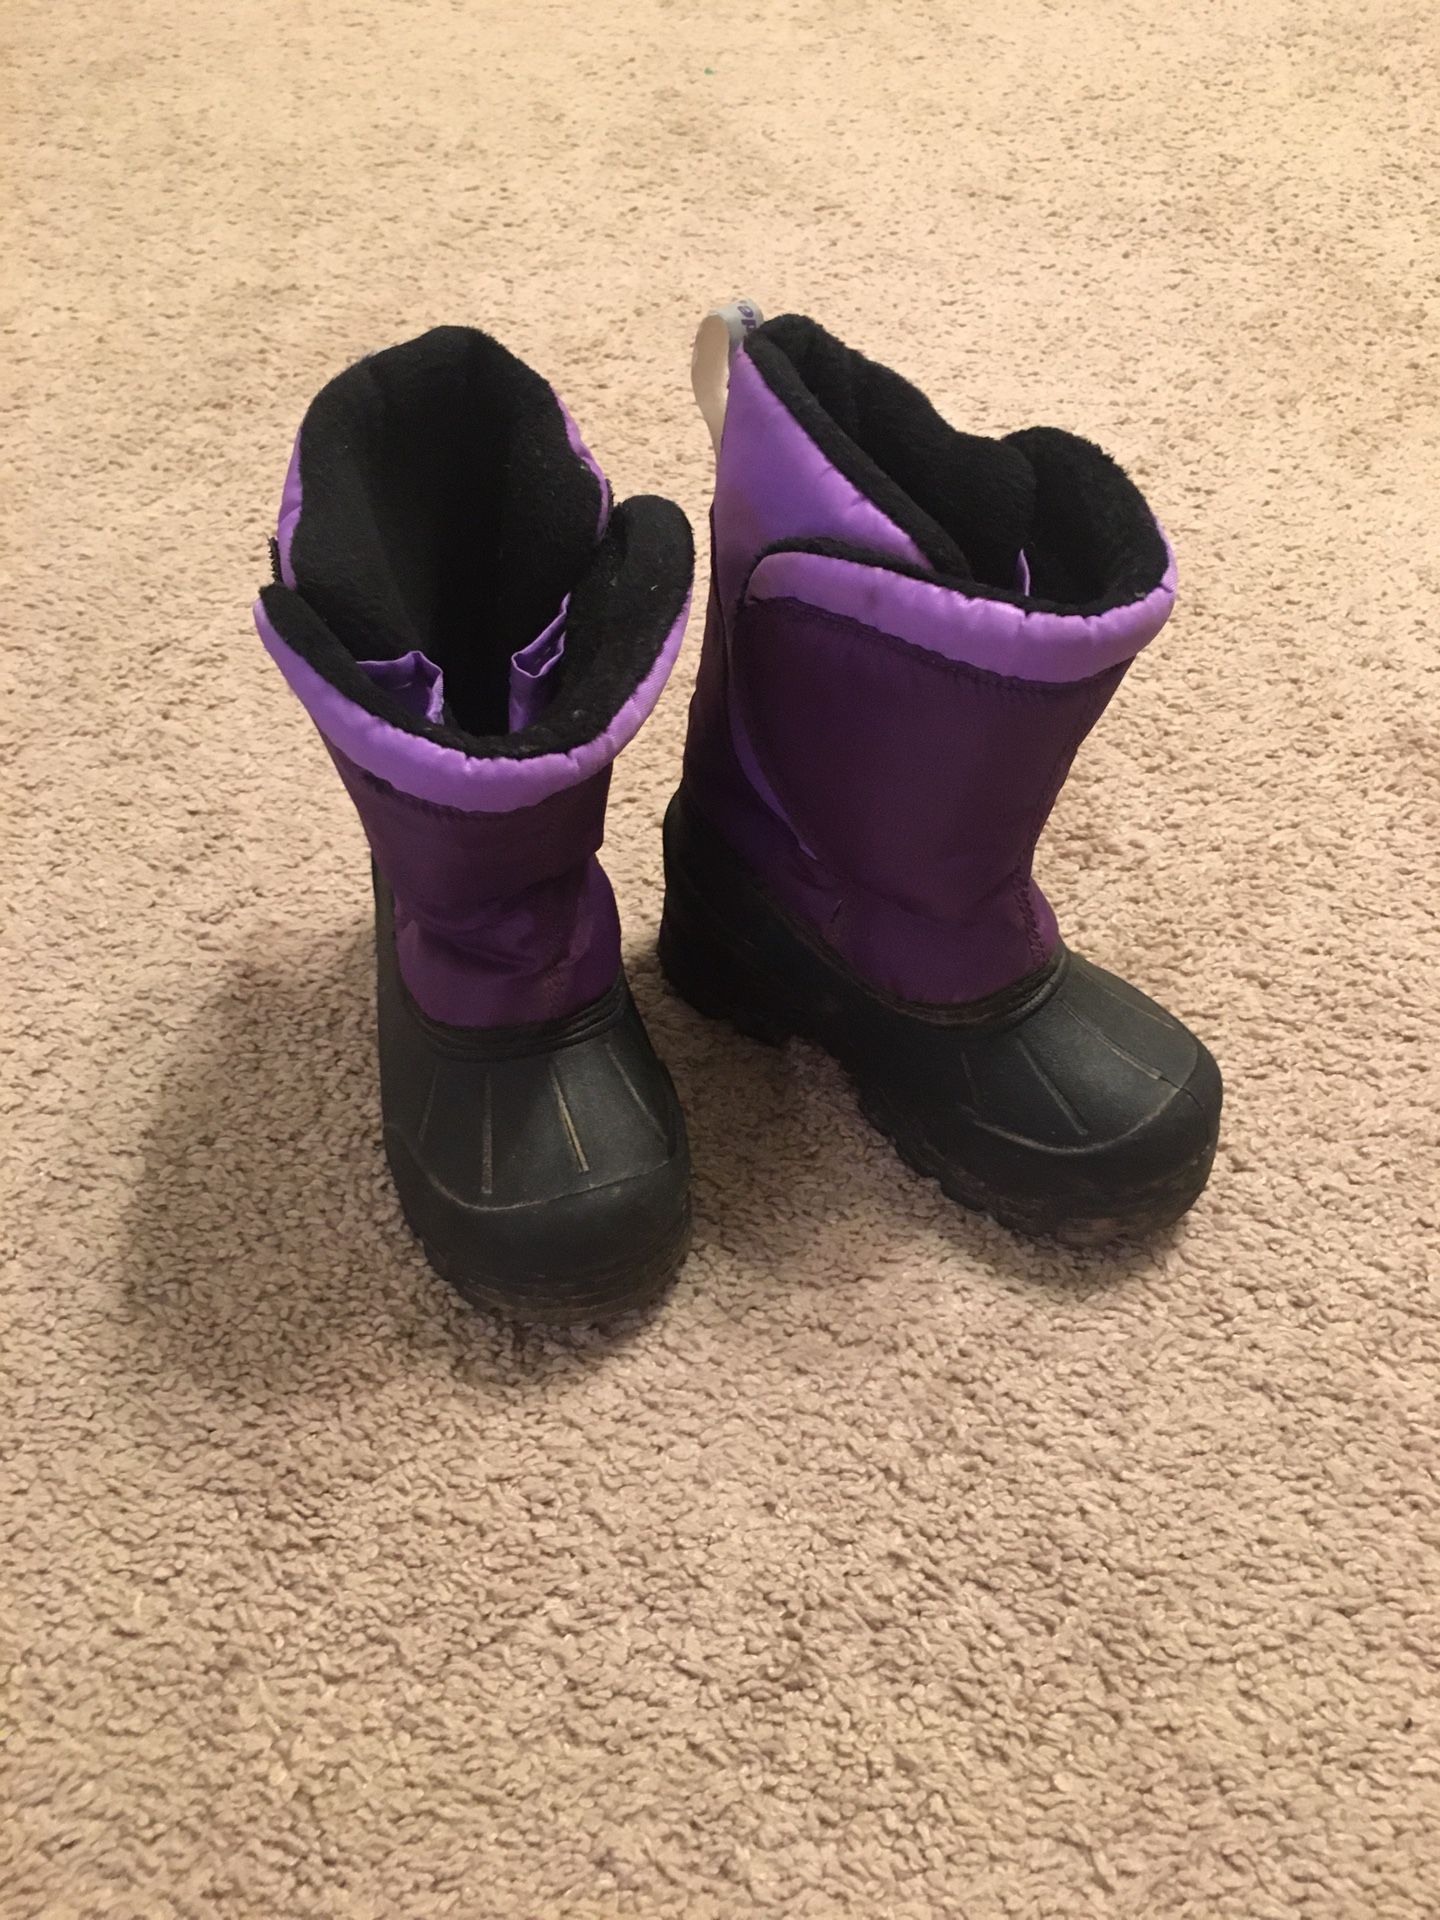 Toddler Girls Snow Boots Size 9 